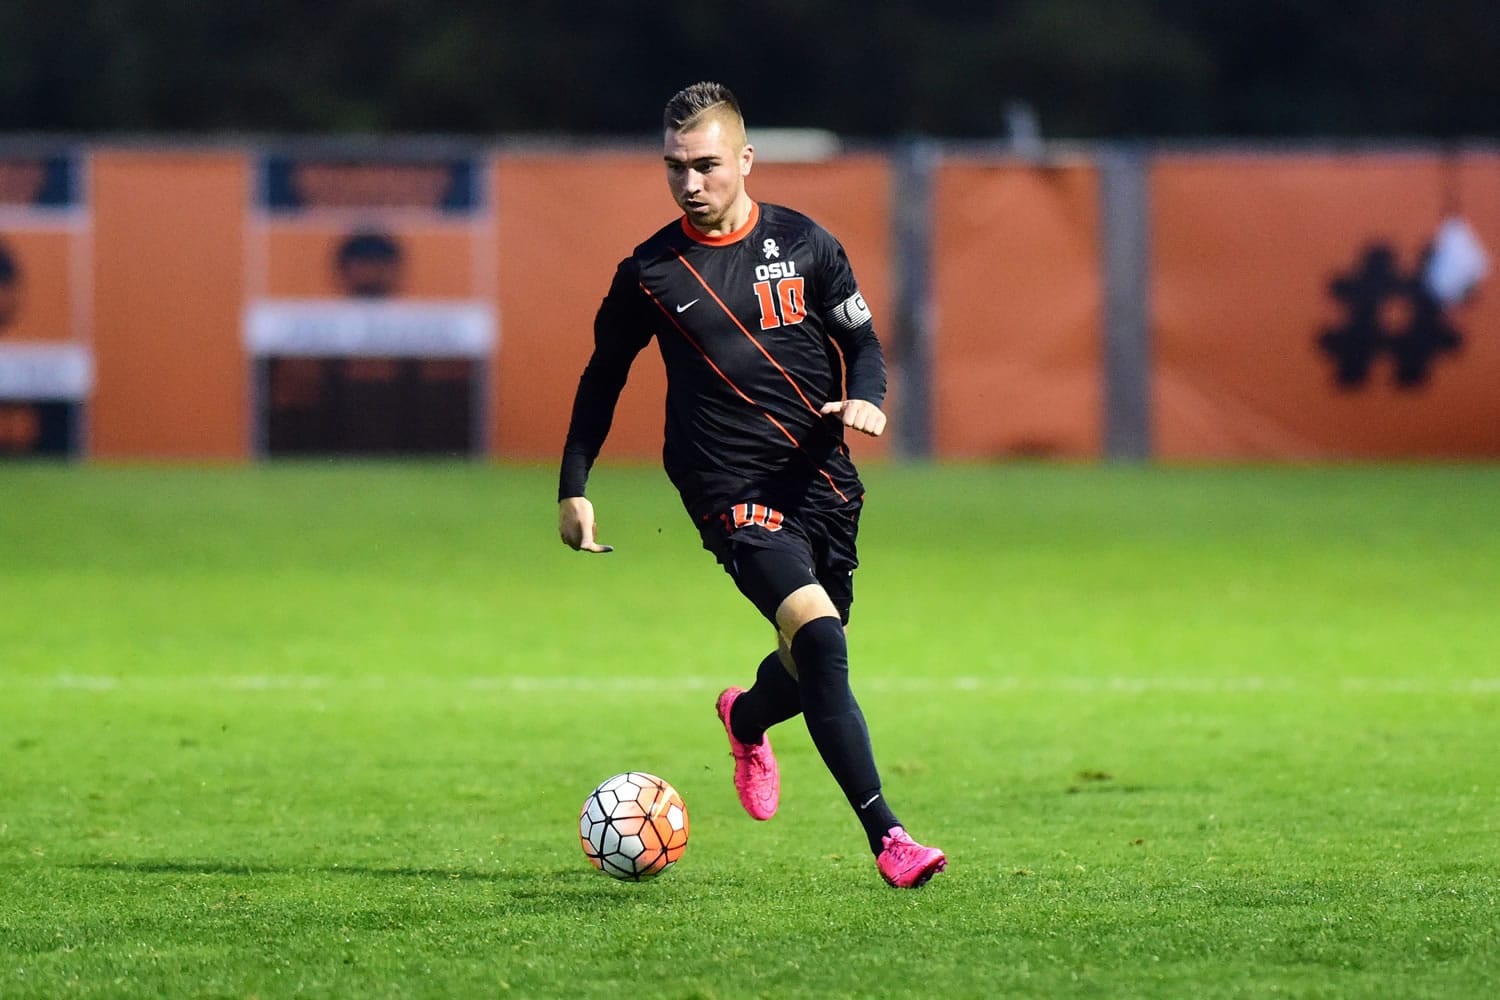 Union High School graduate Mikhail Doholis just finished his senior season on the Oregon State University soccer team. He will attend the Major League Soccer combine this week.